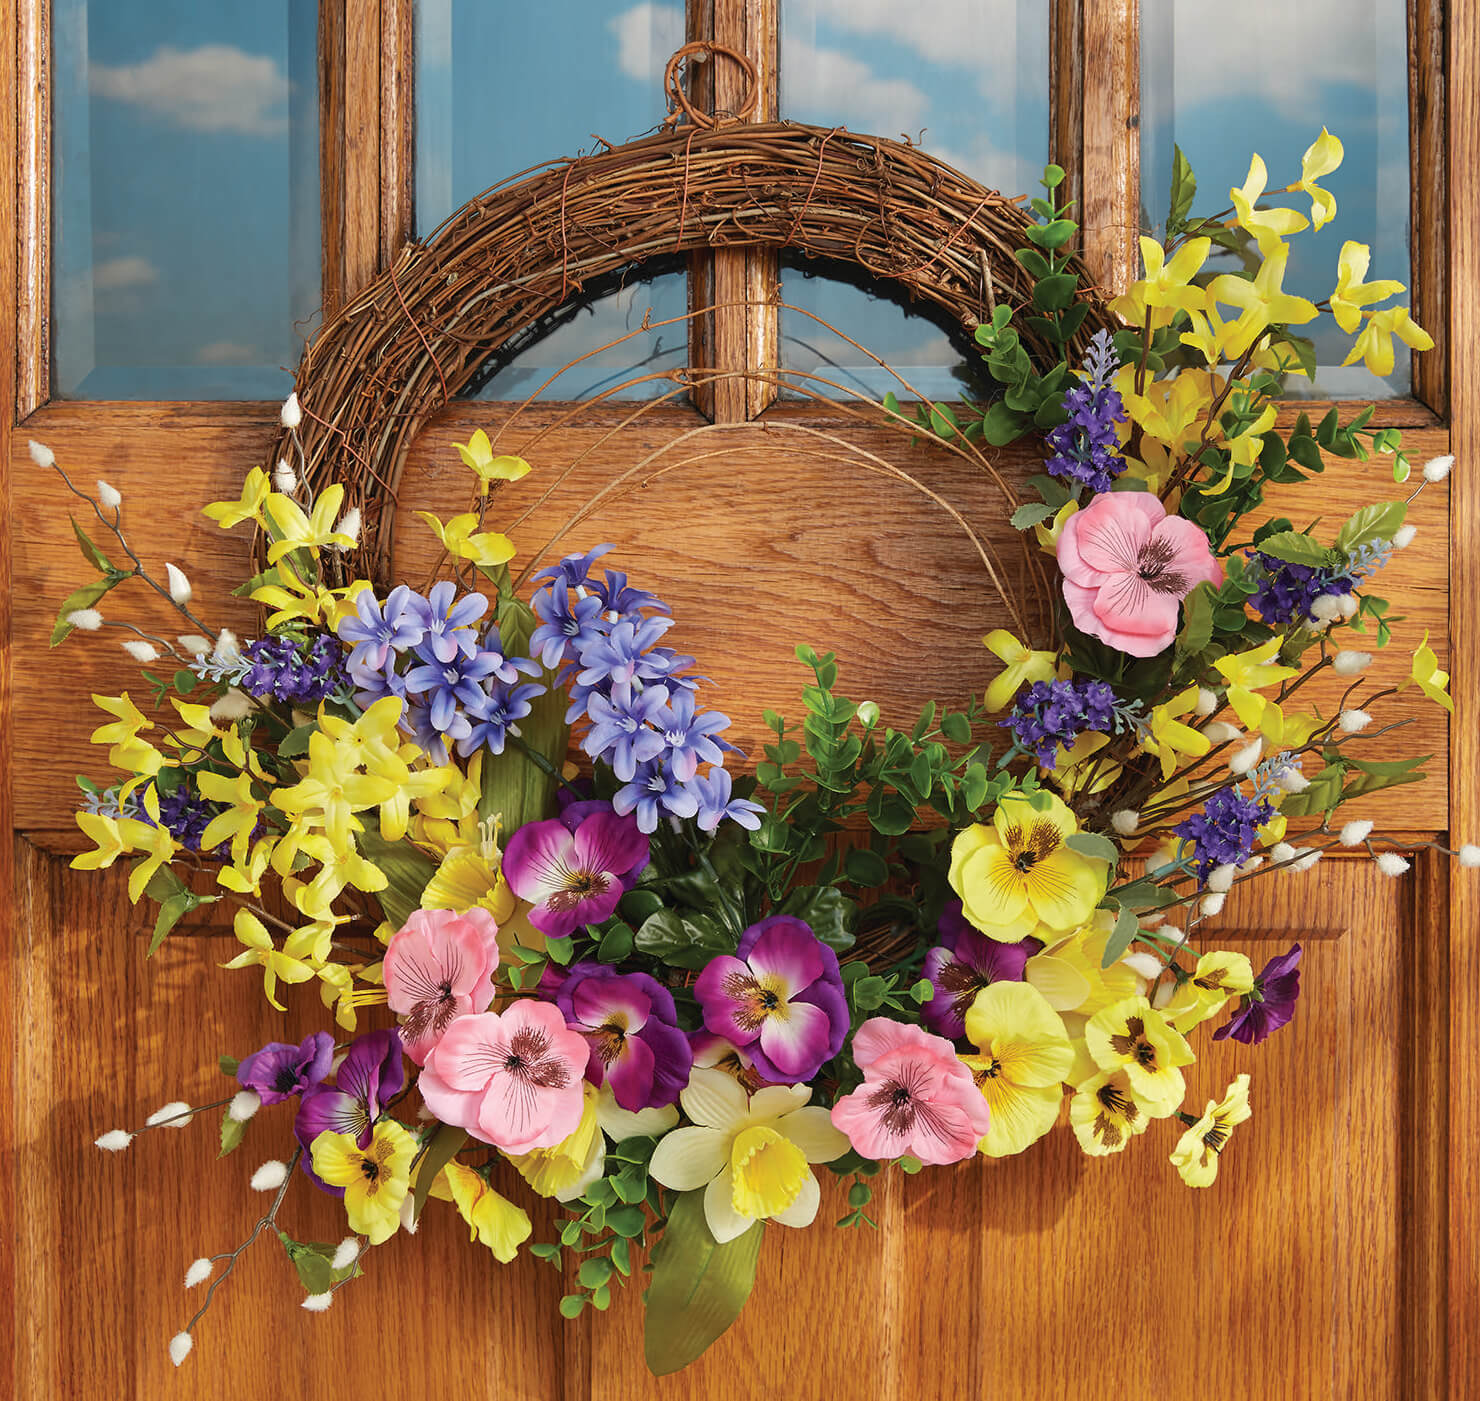 blooming country floral wreath with yellow daffodils, purple and pink pansies, and lavender lilacs